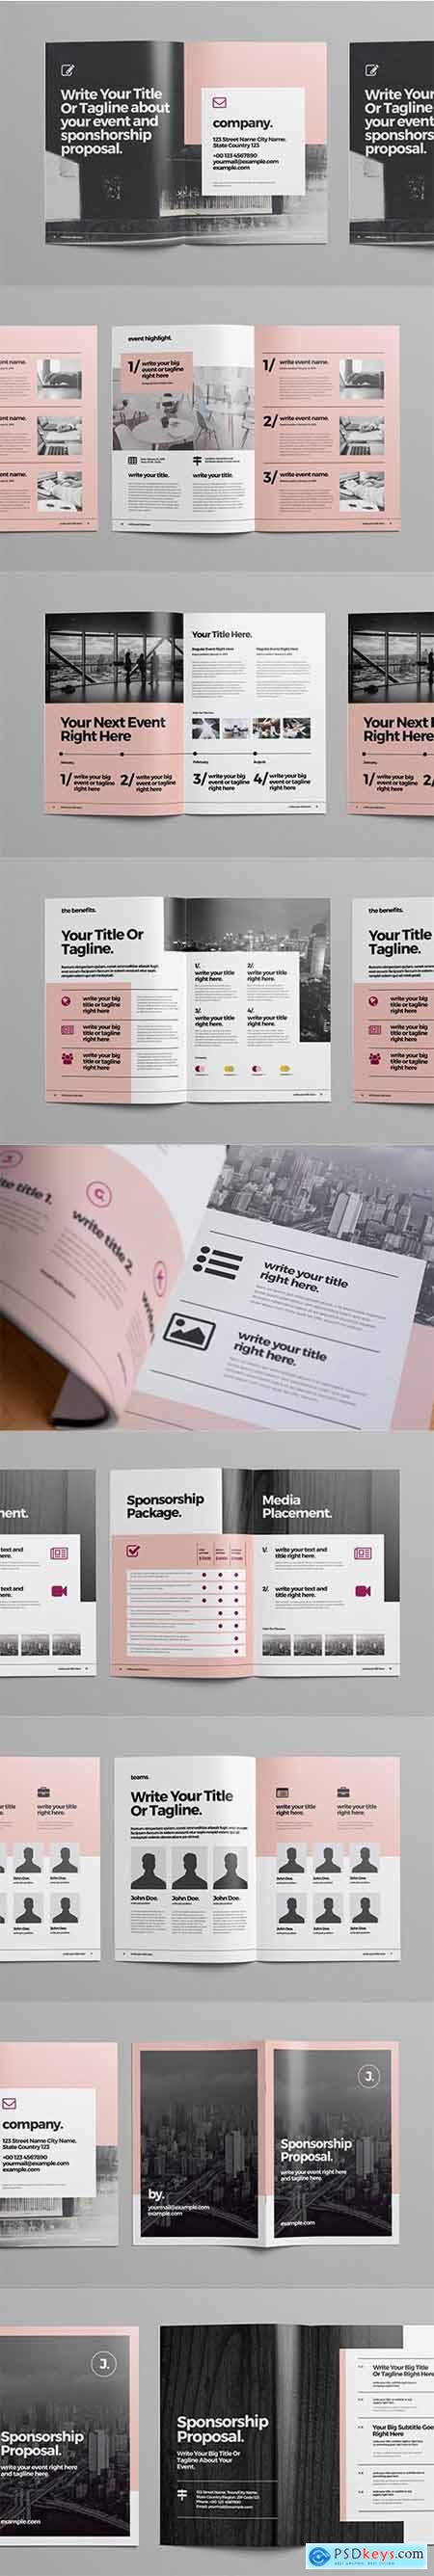 sponsorship-proposal-template-free-download-photoshop-vector-stock